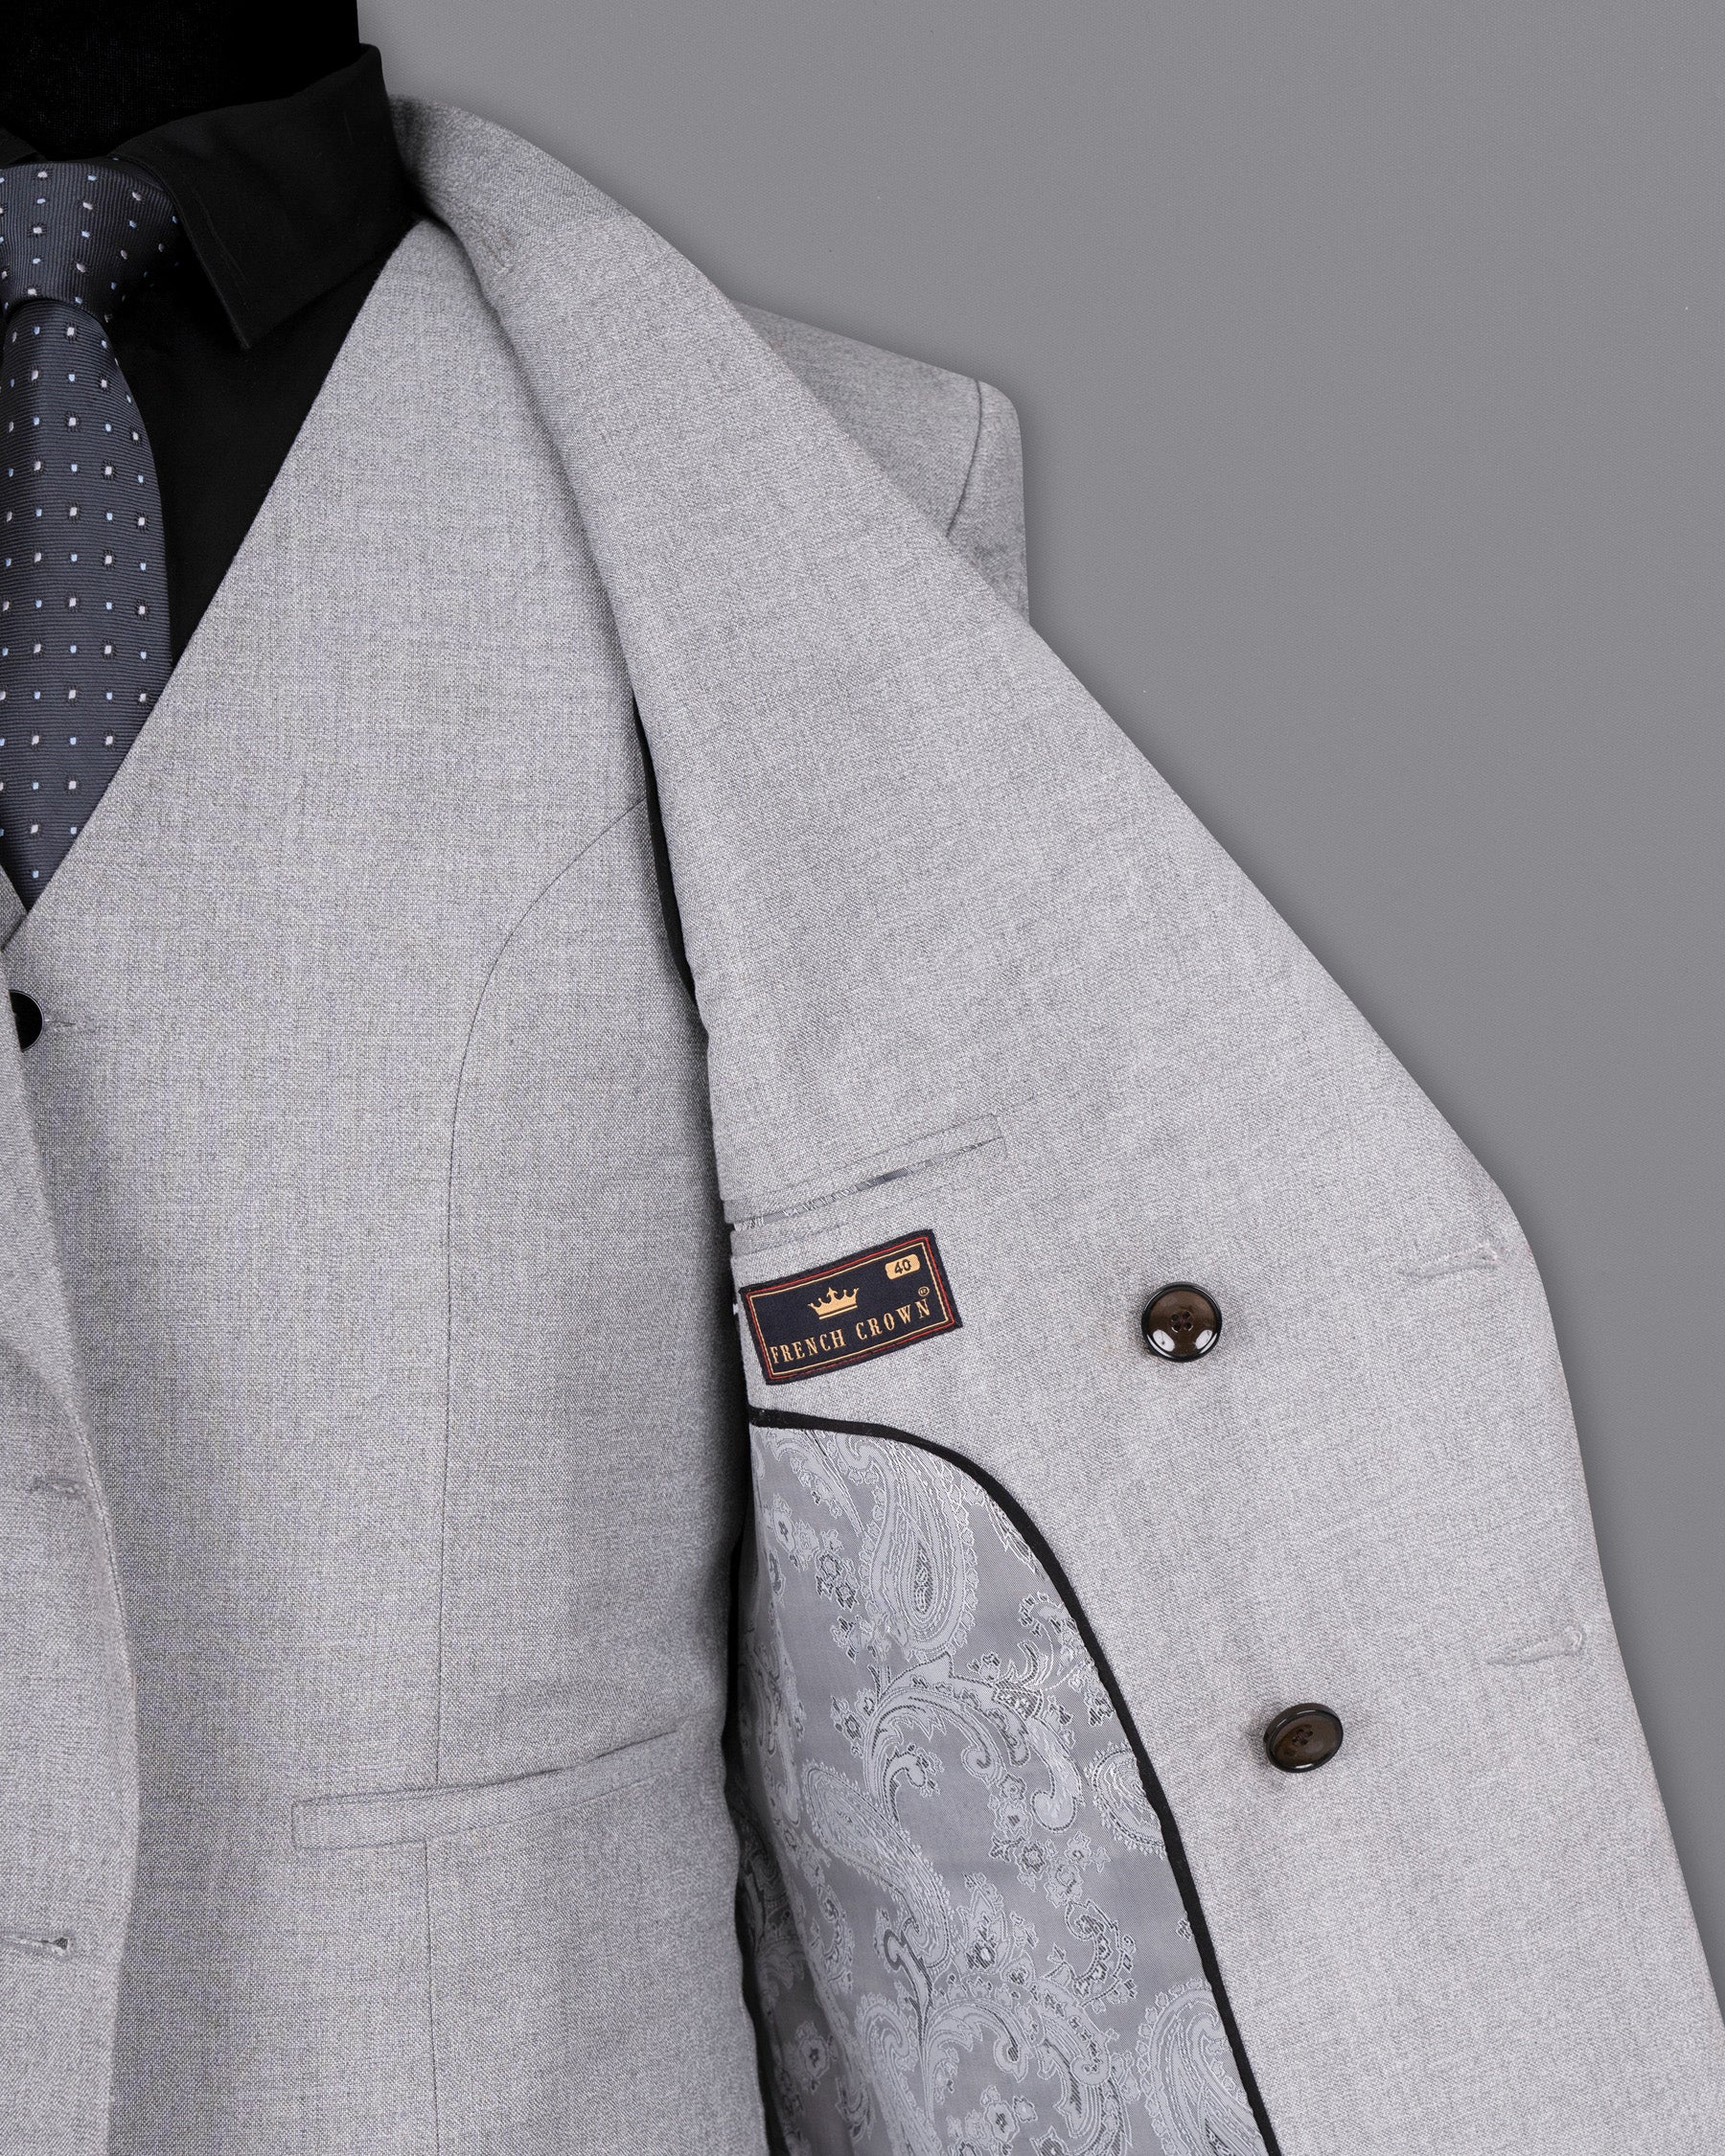 Silver Sand Grey Double-Breasted Wool Rich Suit ST1529-DB-36, ST1529-DB-38, ST1529-DB-40, ST1529-DB-42, ST1529-DB-44, ST1529-DB-46, ST1529-DB-48, ST1529-DB-50, ST1529-DB-52, ST1529-DB-54, ST1529-DB-56, ST1529-DB-58, ST1529-DB-60